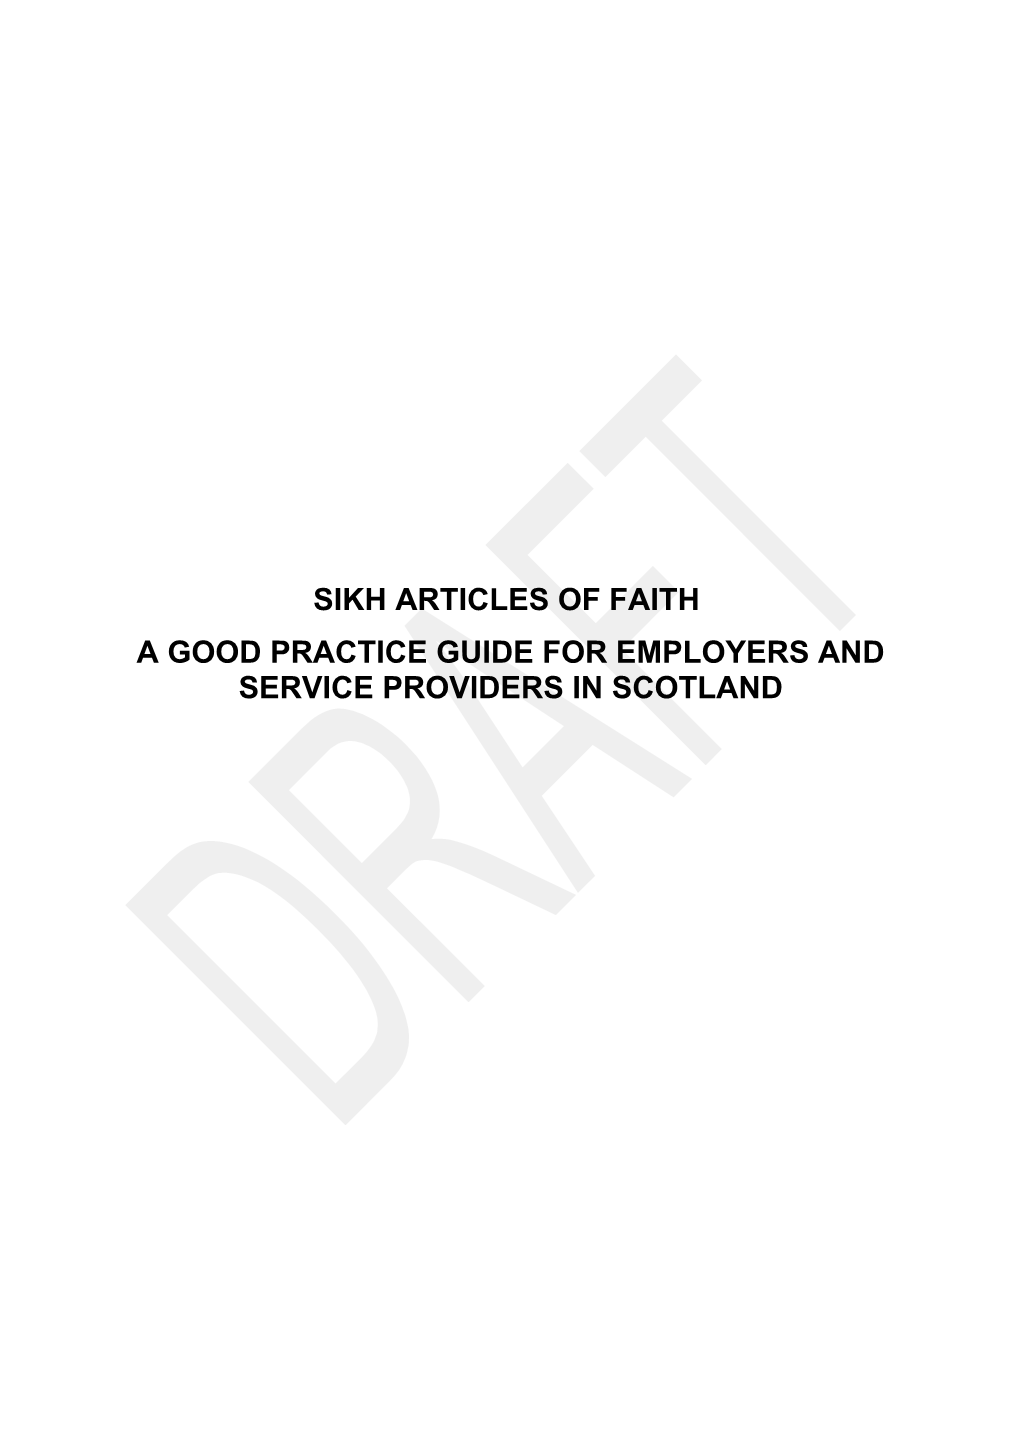 A Good Practice Guide for Employers and Service Providers in Scotland